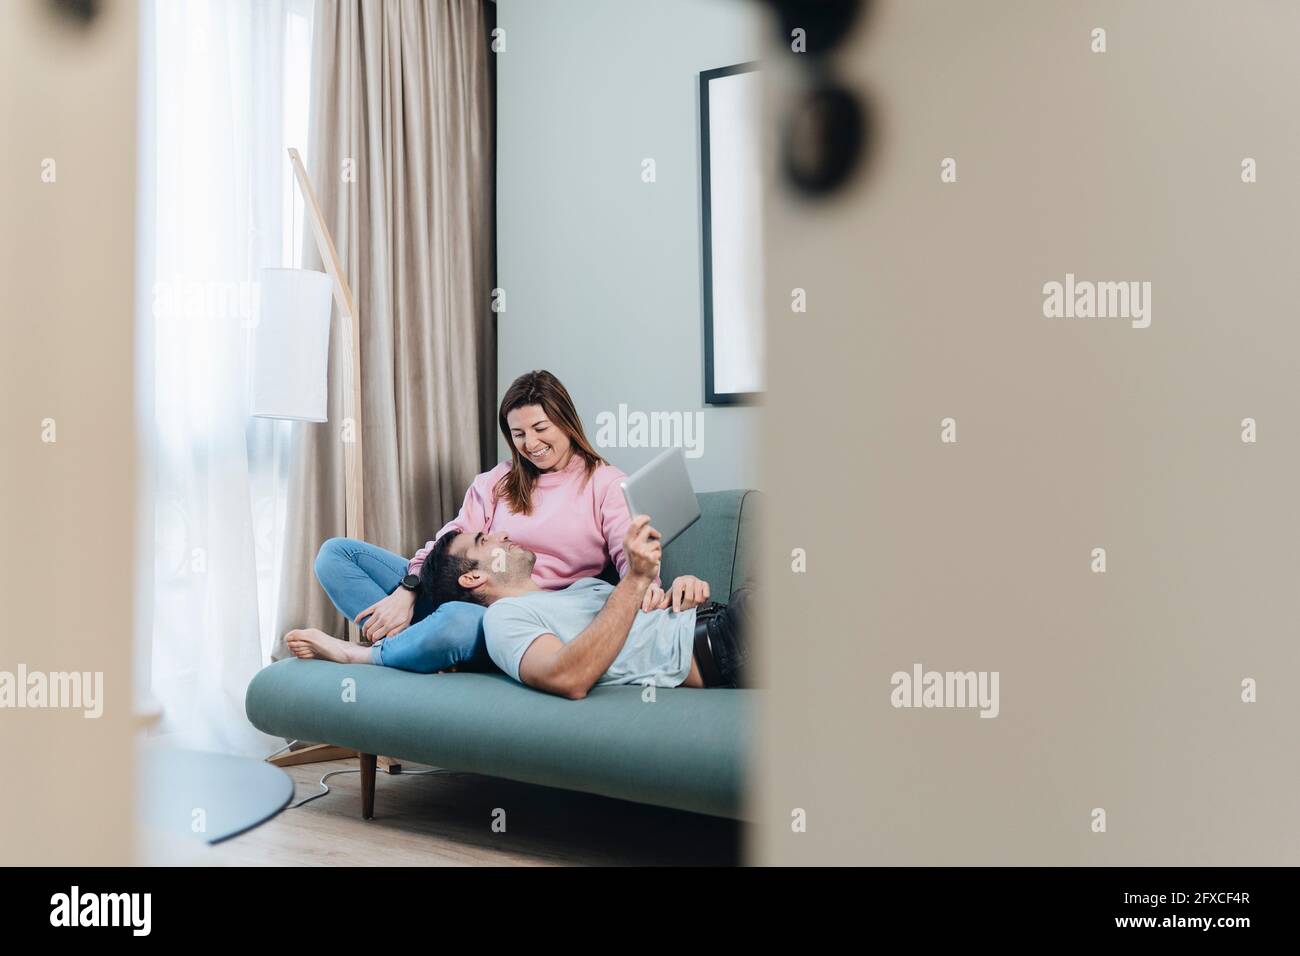 Smiling woman looking at man lying on lap in hotel room Stock Photo